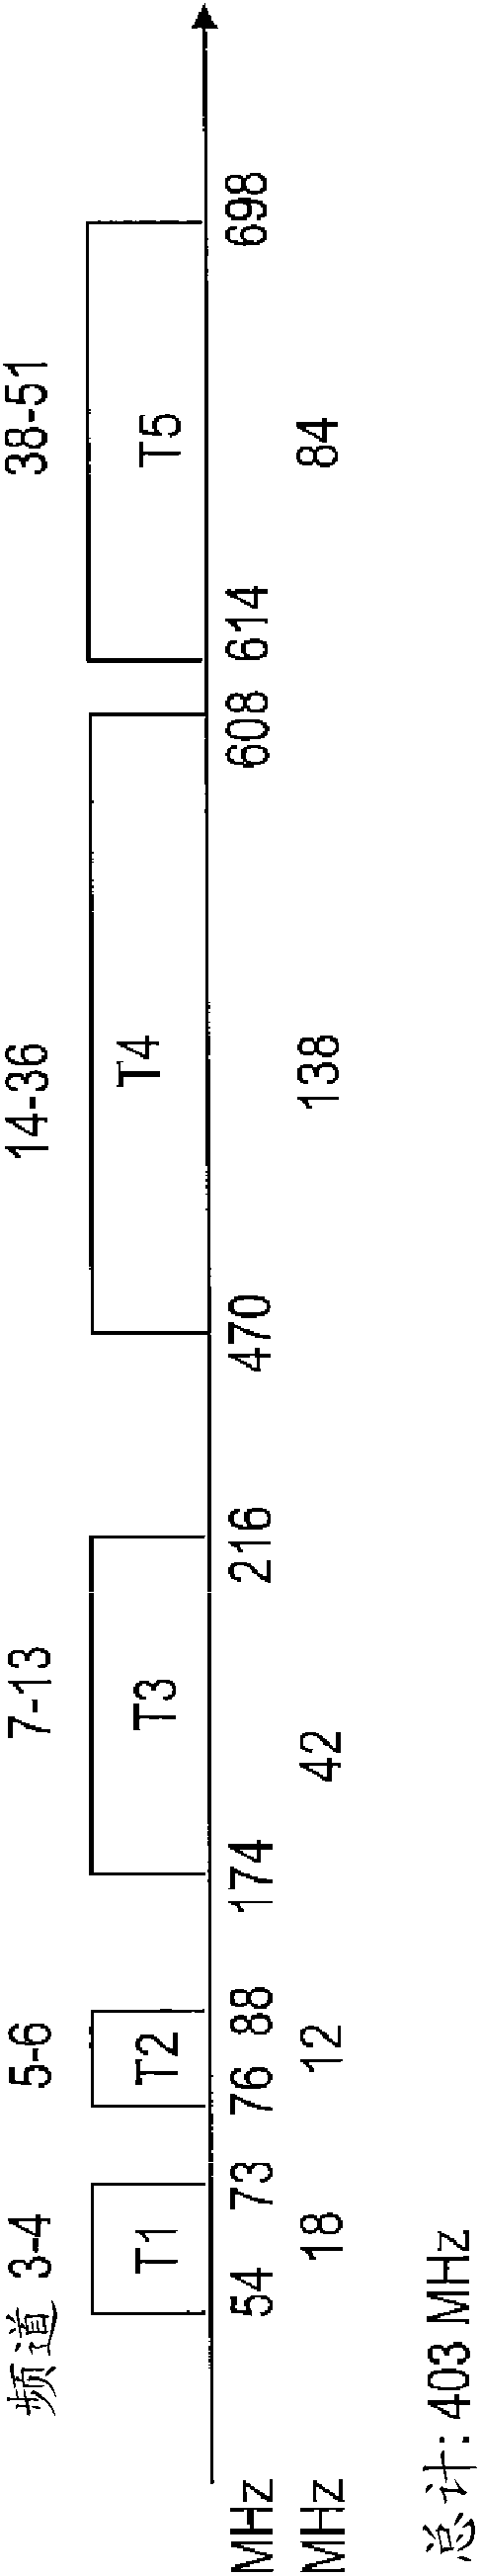 Device and method for detecting unused TV spectrum for wireless communication systems